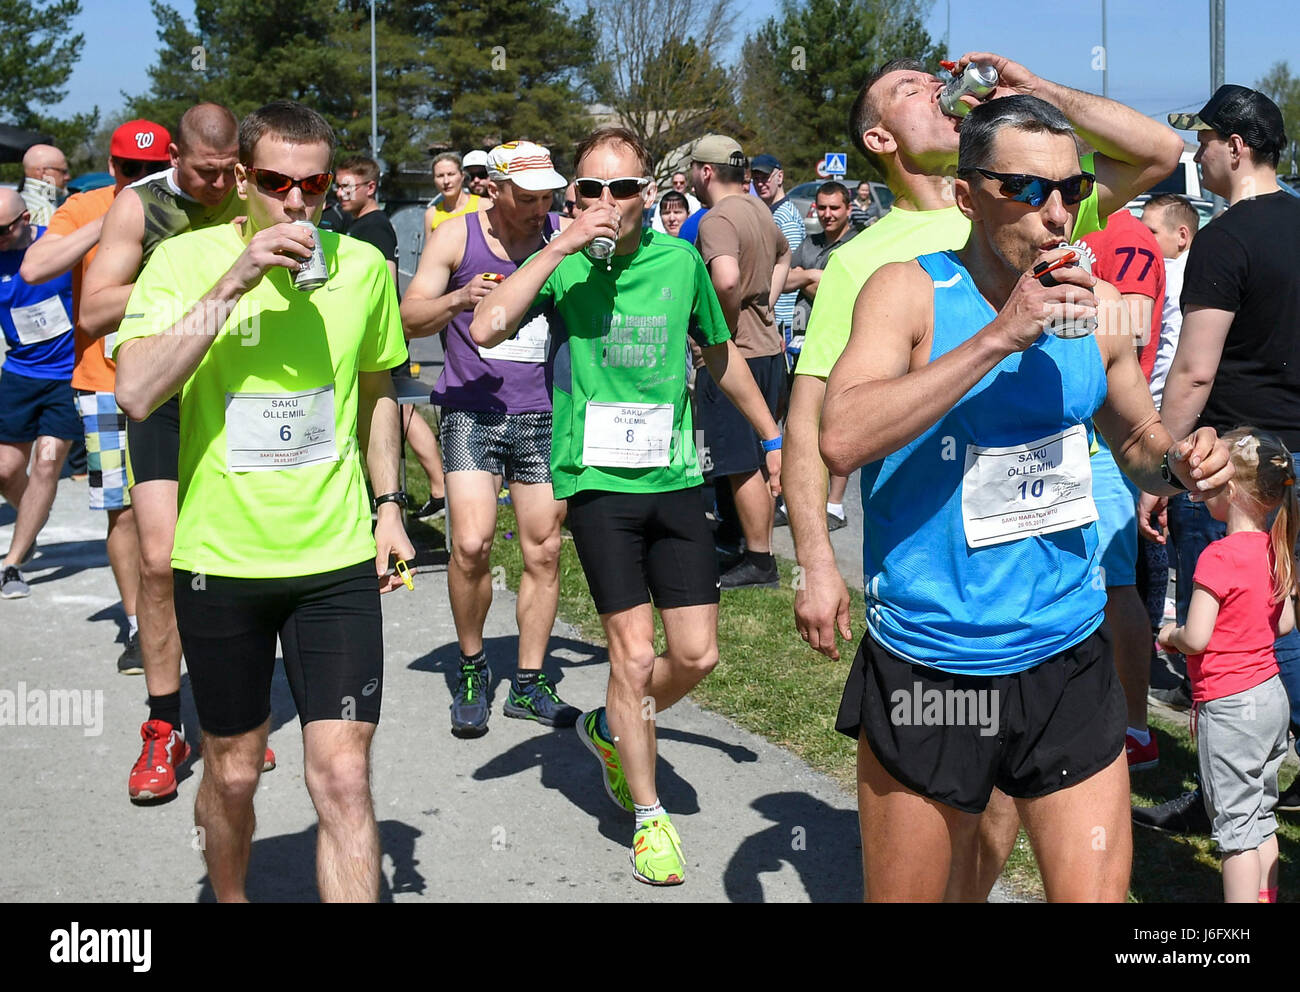 Saku, Estonia. 20th May, 2017. Participants drink beer during the Beer Mile Run in Saku, Estonia, May 20, 2017. Participants must run four laps for a total of one mile distance and start each lap by drinking a can of beer. Credit: Sergei Stepanov/Xinhua/Alamy Live News Stock Photo